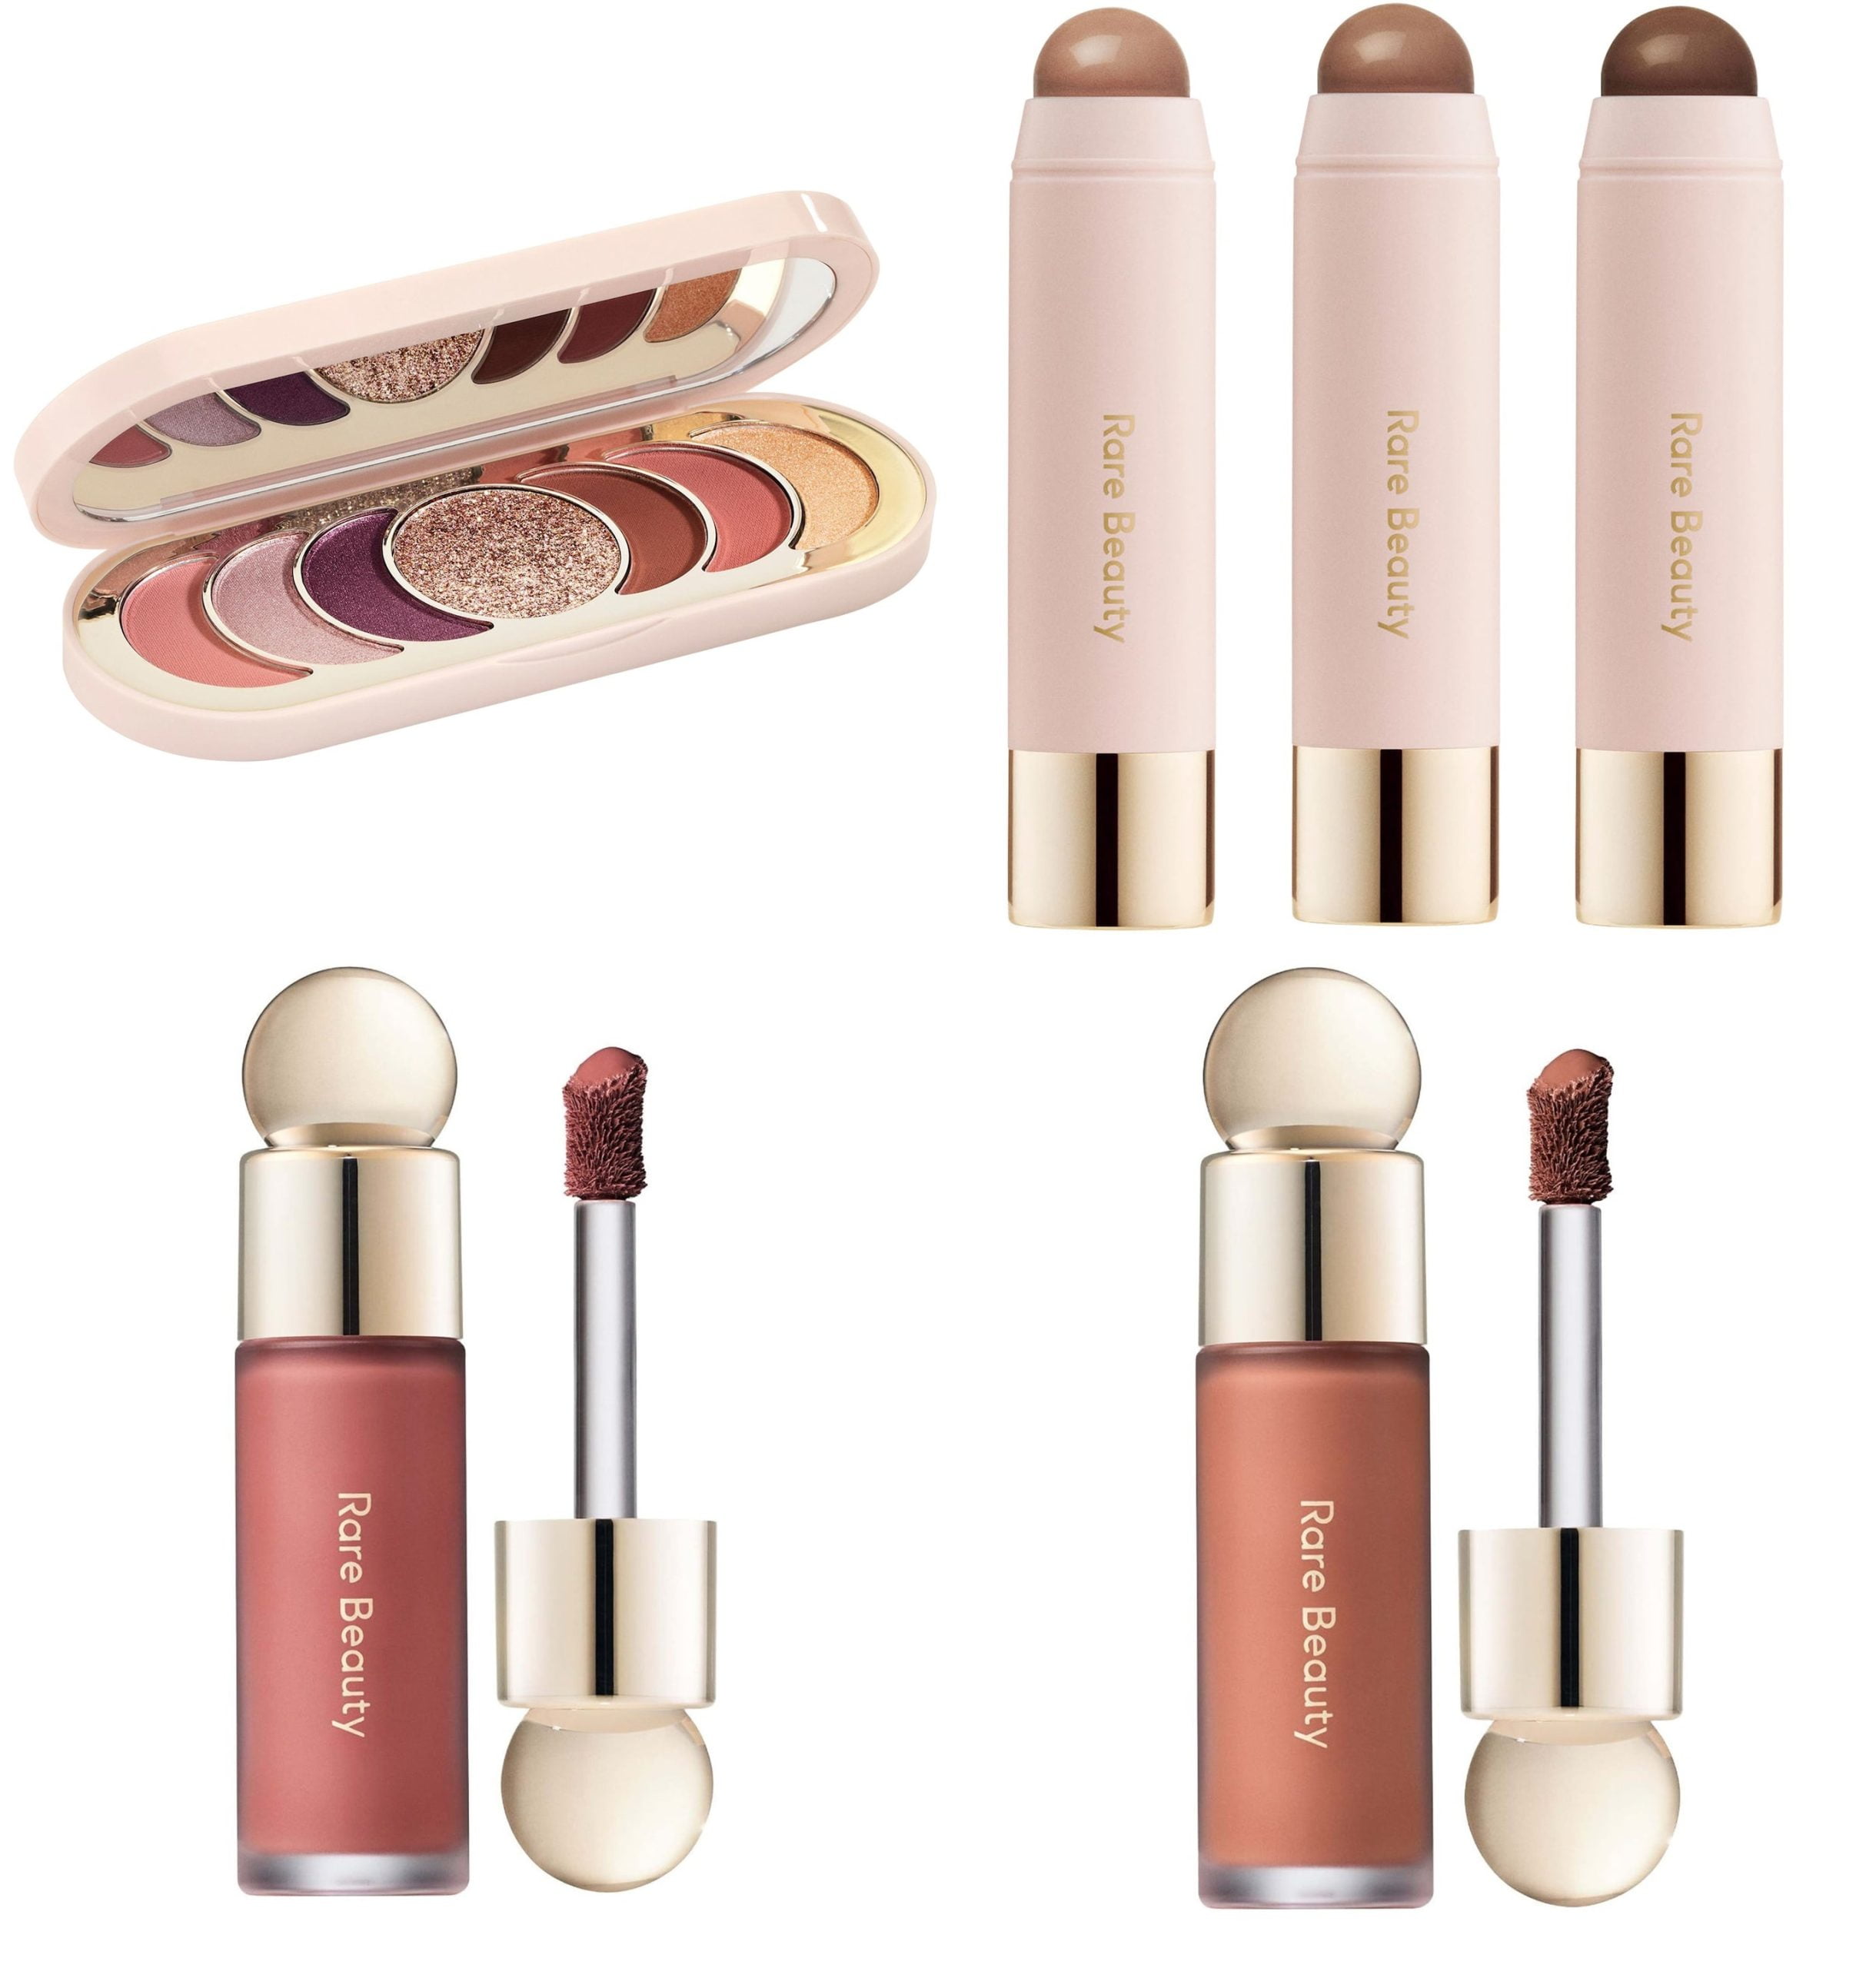 New launches from Rare Beauty